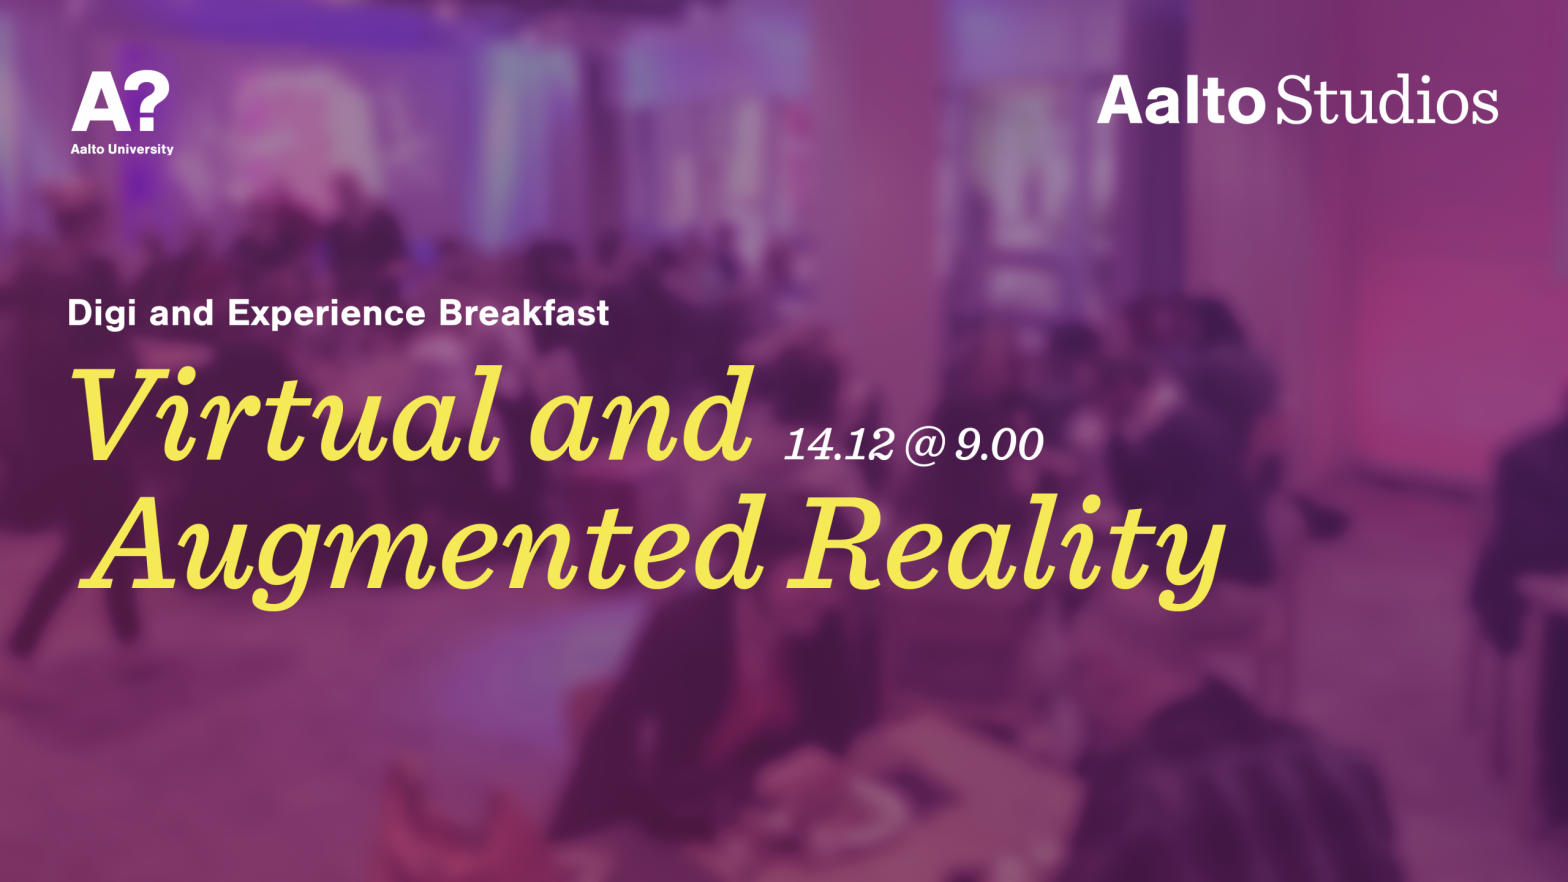 Interested in AR and VR? Like breakfast?